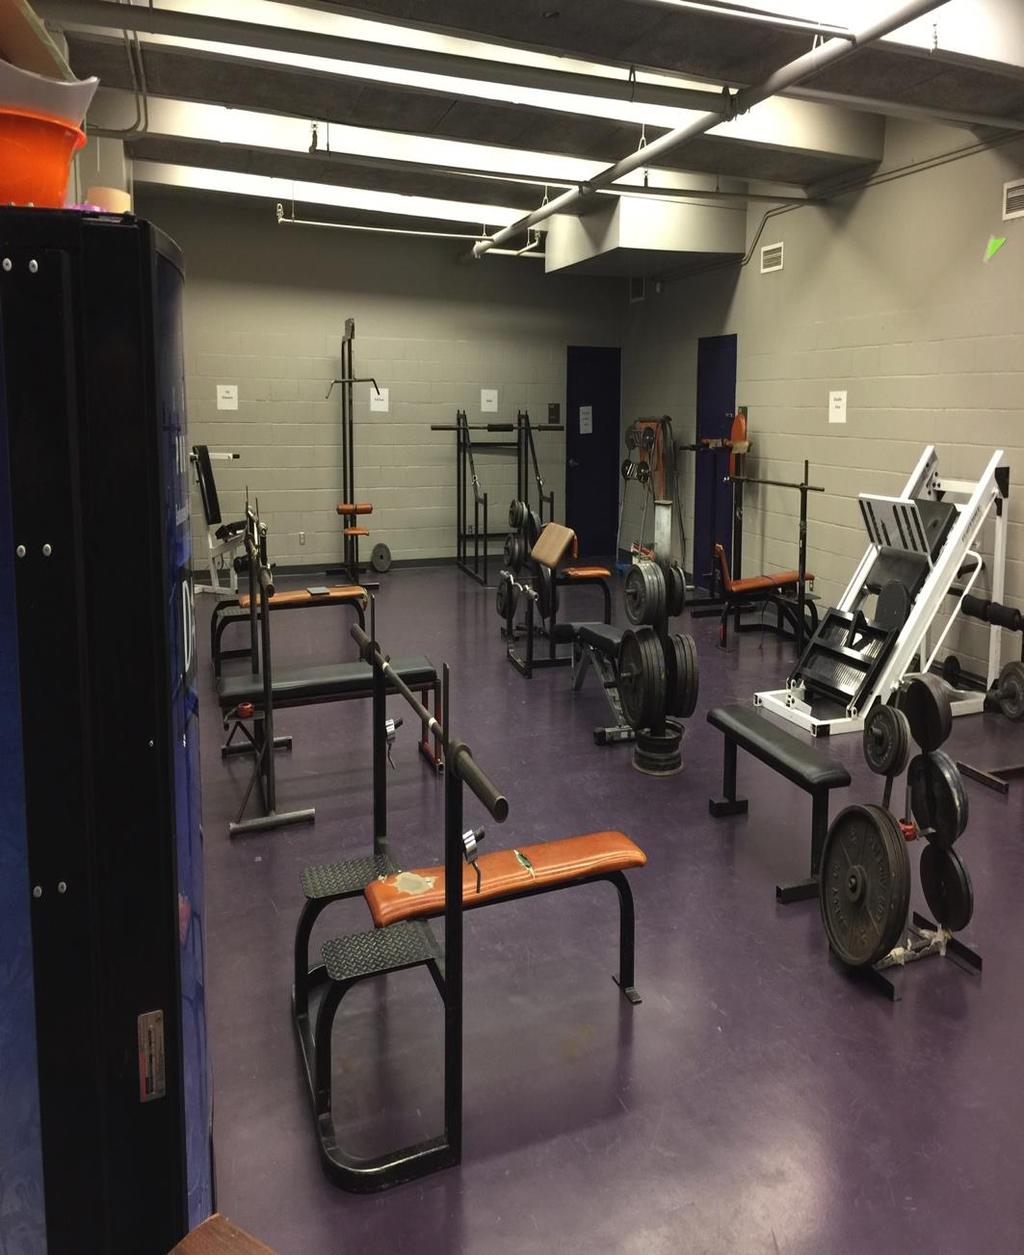 KMS Weight Room Concerns Equipment Spacing: Overall spacing of the equipment is pretty good Concern#1: Some items on the floor that should not be there Concern#2: